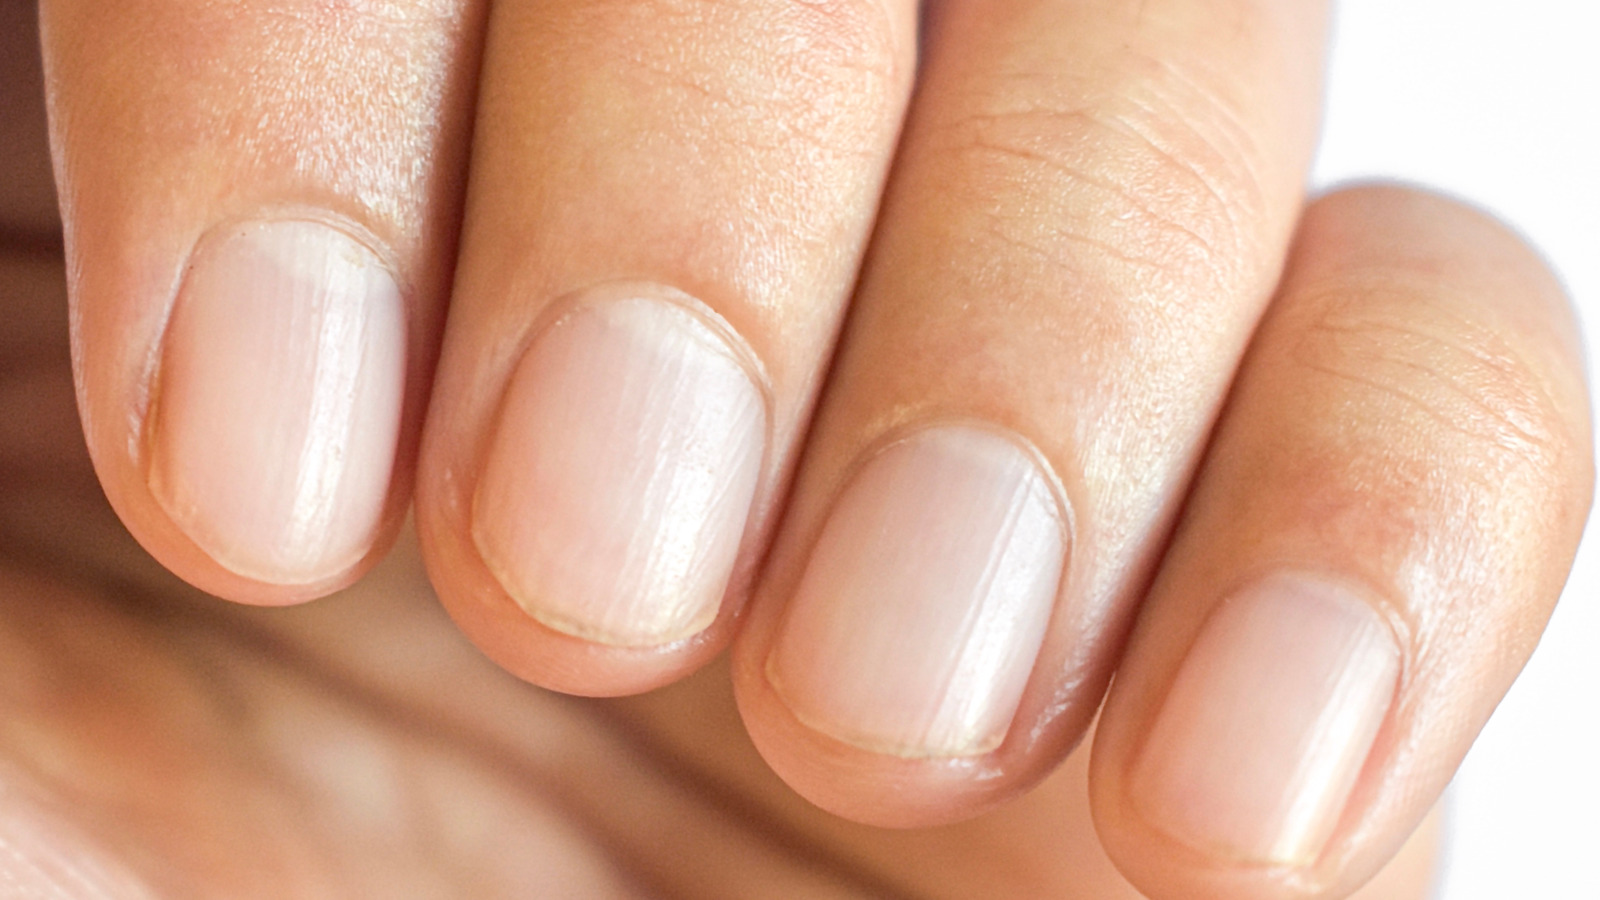 What is Eczema Nail Pitting?